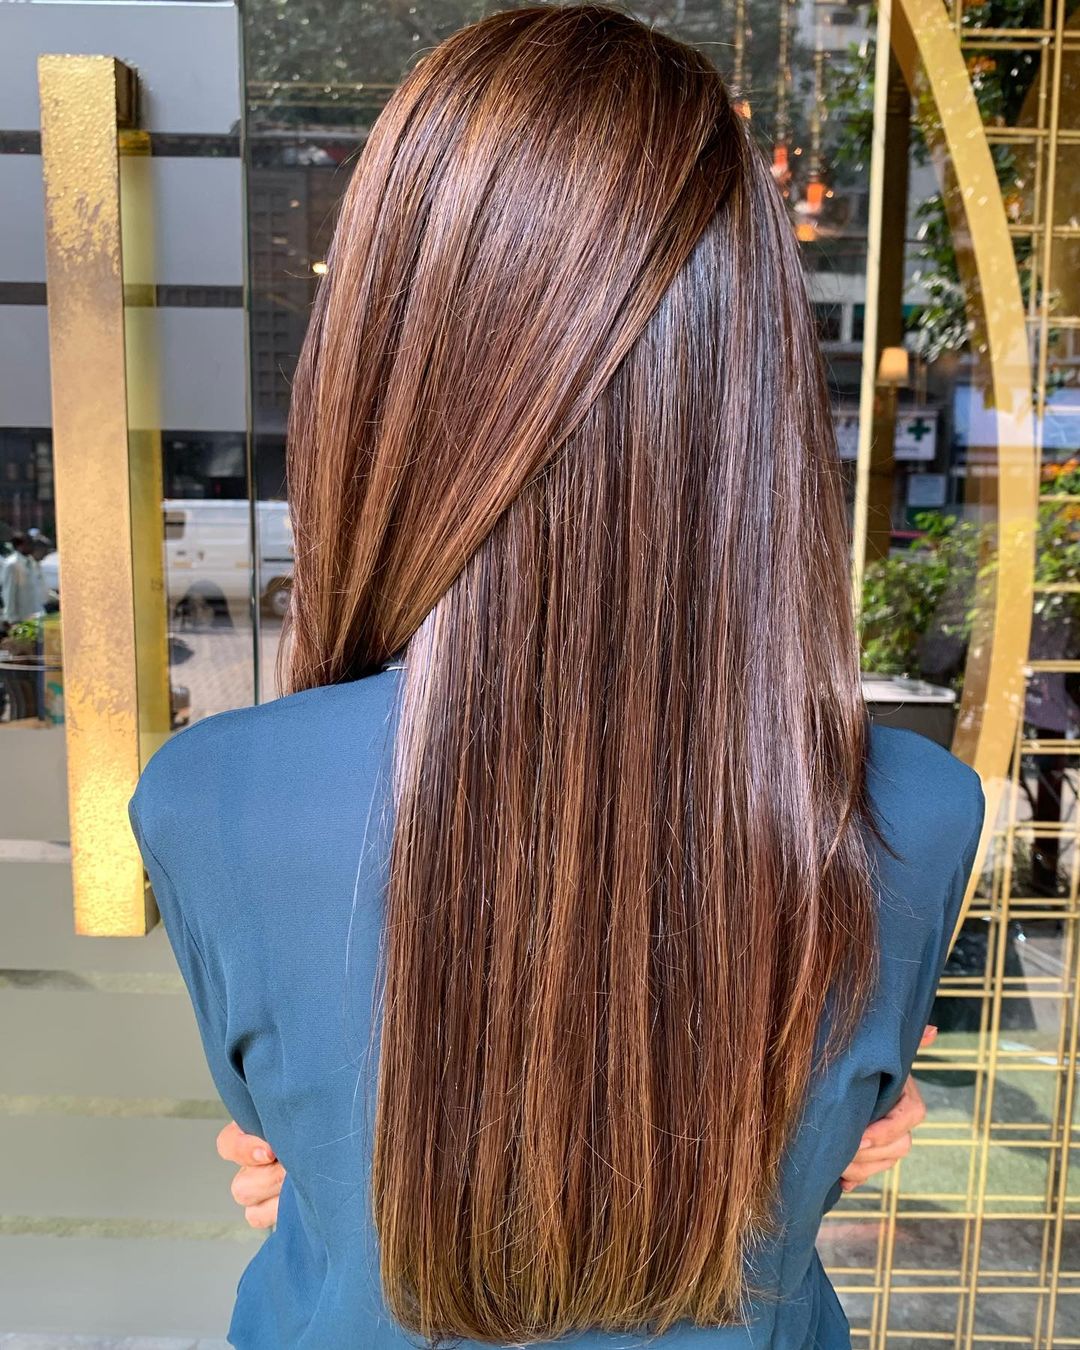 Long Straight Brown Hair with Chestnut Highlights